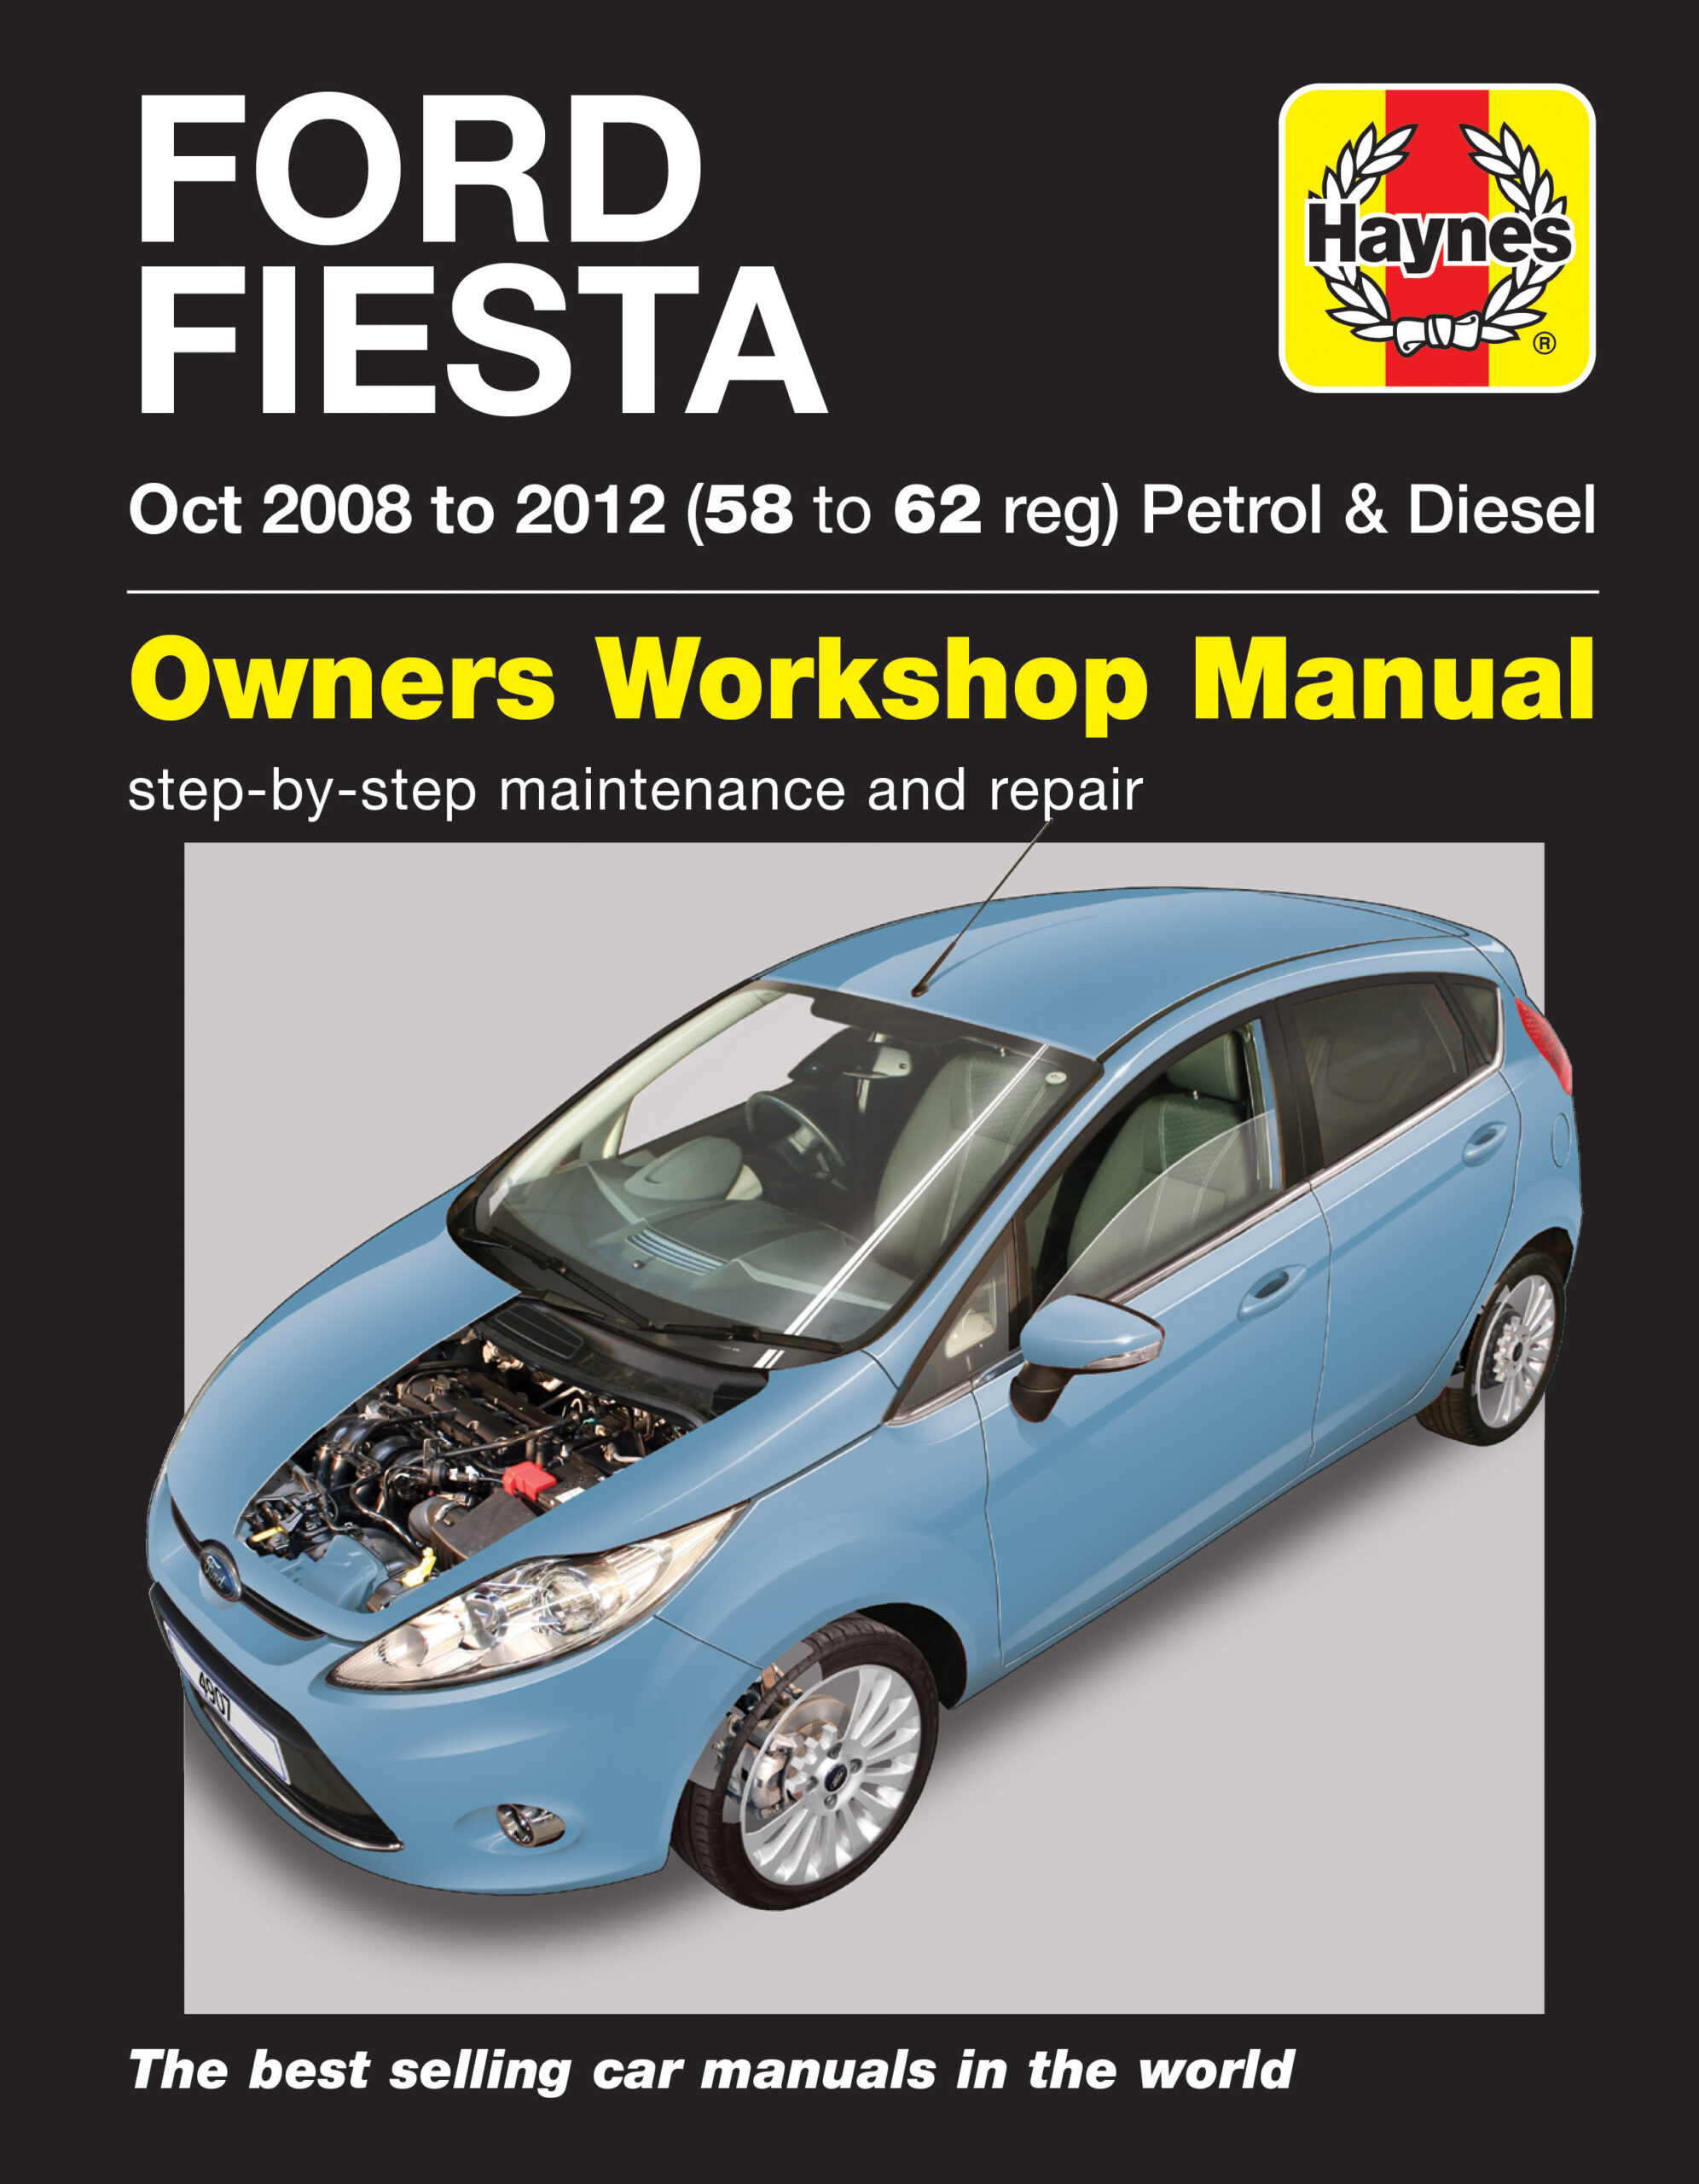 Ford Fiesta Troubleshooting: Common Car Issues Guide